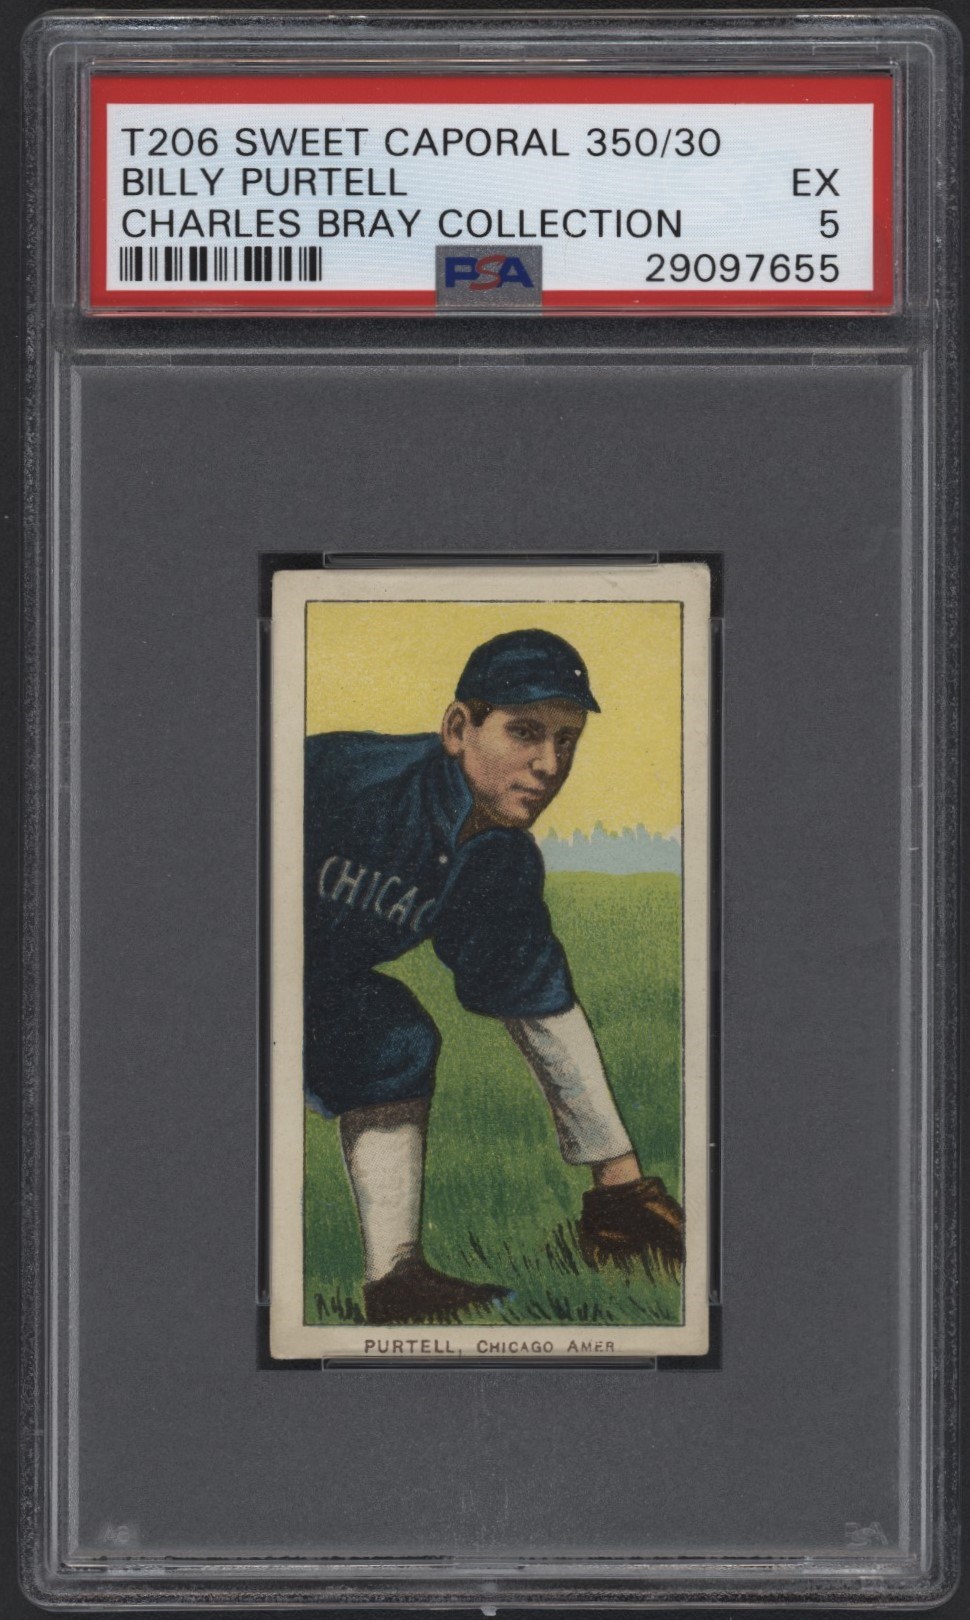 Baseball and Trading Cards - T206 Sweet Caporal 350/30 Billy Purtell PSA EX 5 From the Charles Bray Collection